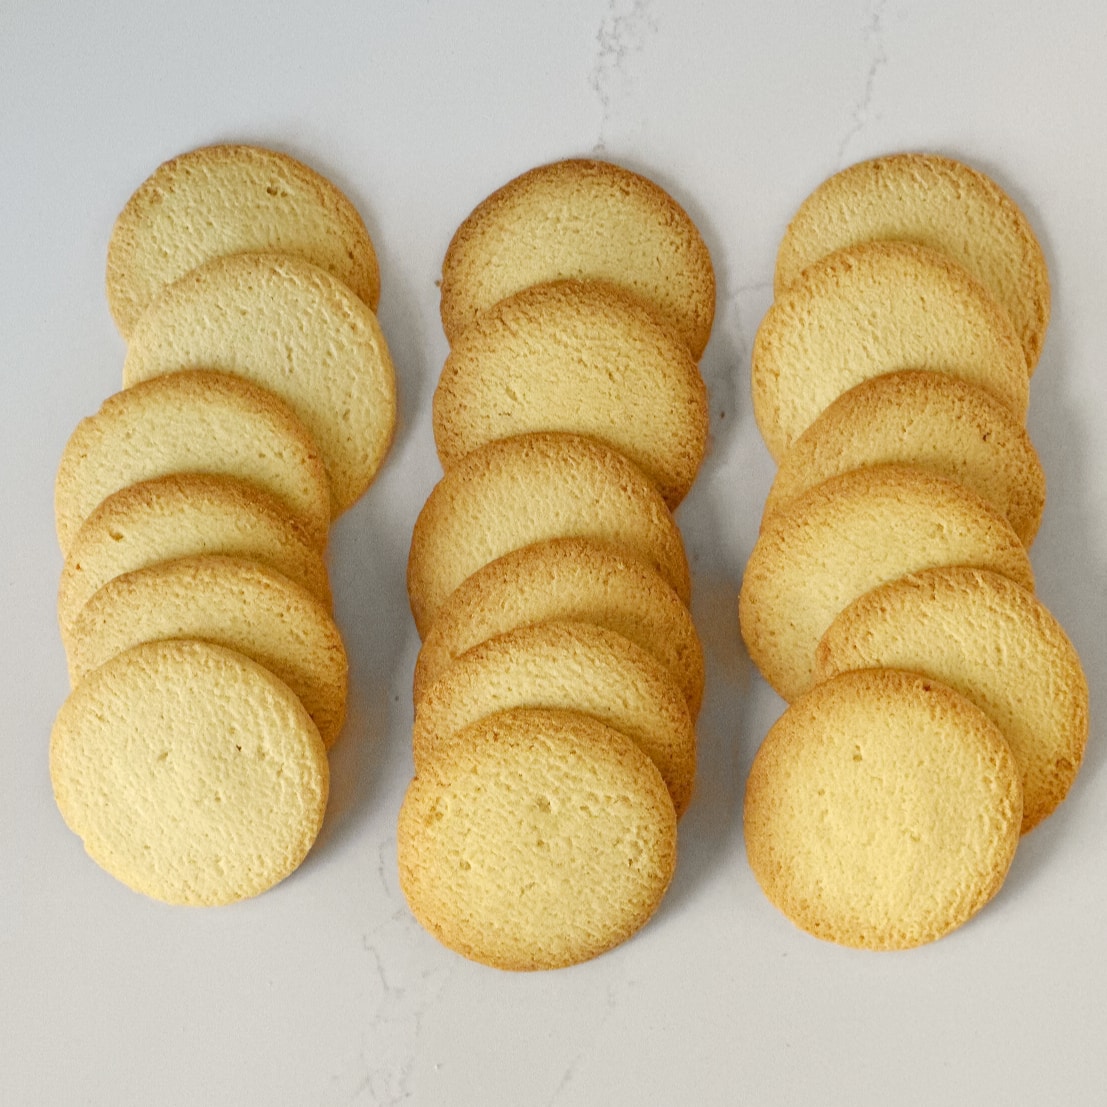 Sugar Cookies made with butter